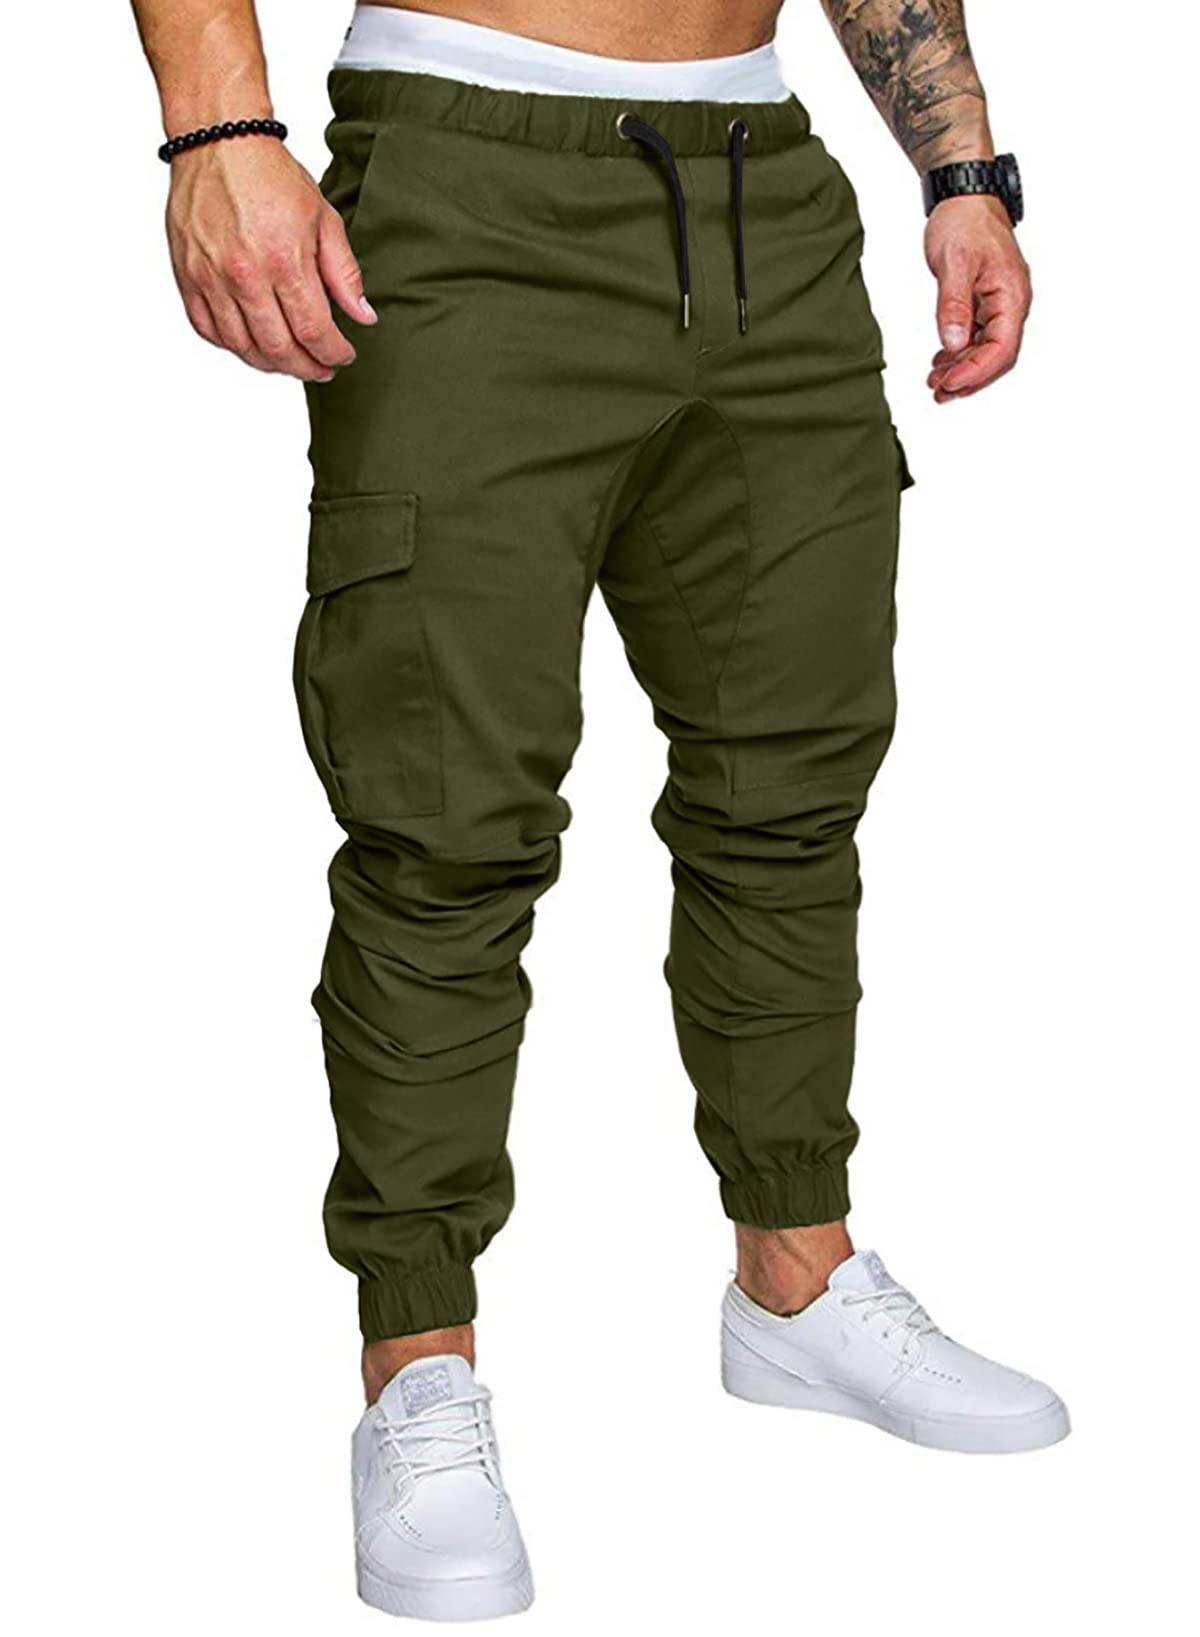 Men's Drawstring Cargo Pants Athletic-Fit 6 Pockets Casual Work Joggers  Sweatpants Lightweight Outdoor Trousers